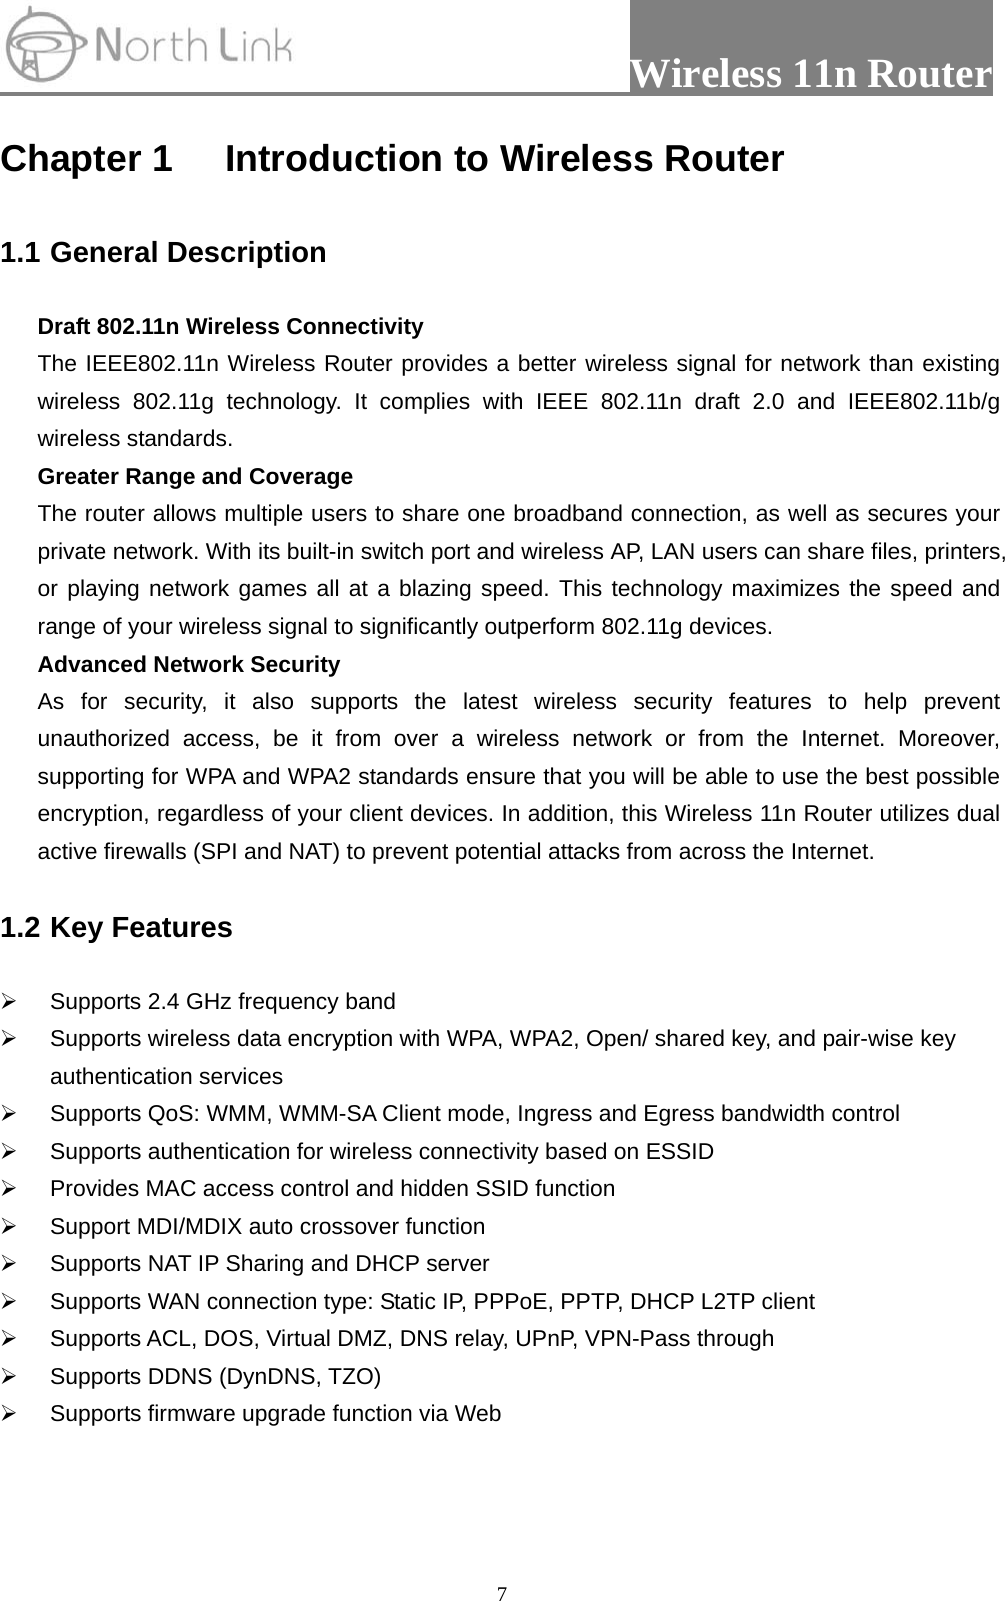                 Wireless 11n Router   7Chapter 1 Introduction to Wireless Router  1.1 General Description  Draft 802.11n Wireless Connectivity The IEEE802.11n Wireless Router provides a better wireless signal for network than existing wireless 802.11g technology. It complies with IEEE 802.11n draft 2.0 and IEEE802.11b/g wireless standards. Greater Range and Coverage The router allows multiple users to share one broadband connection, as well as secures your private network. With its built-in switch port and wireless AP, LAN users can share files, printers, or playing network games all at a blazing speed. This technology maximizes the speed and range of your wireless signal to significantly outperform 802.11g devices. Advanced Network Security As for security, it also supports the latest wireless security features to help prevent unauthorized access, be it from over a wireless network or from the Internet. Moreover, supporting for WPA and WPA2 standards ensure that you will be able to use the best possible encryption, regardless of your client devices. In addition, this Wireless 11n Router utilizes dual active firewalls (SPI and NAT) to prevent potential attacks from across the Internet.  1.2 Key Features  ¾  Supports 2.4 GHz frequency band ¾  Supports wireless data encryption with WPA, WPA2, Open/ shared key, and pair-wise key authentication services ¾  Supports QoS: WMM, WMM-SA Client mode, Ingress and Egress bandwidth control ¾  Supports authentication for wireless connectivity based on ESSID ¾  Provides MAC access control and hidden SSID function ¾  Support MDI/MDIX auto crossover function ¾  Supports NAT IP Sharing and DHCP server ¾  Supports WAN connection type: Static IP, PPPoE, PPTP, DHCP L2TP client   ¾  Supports ACL, DOS, Virtual DMZ, DNS relay, UPnP, VPN-Pass through ¾  Supports DDNS (DynDNS, TZO) ¾  Supports firmware upgrade function via Web   